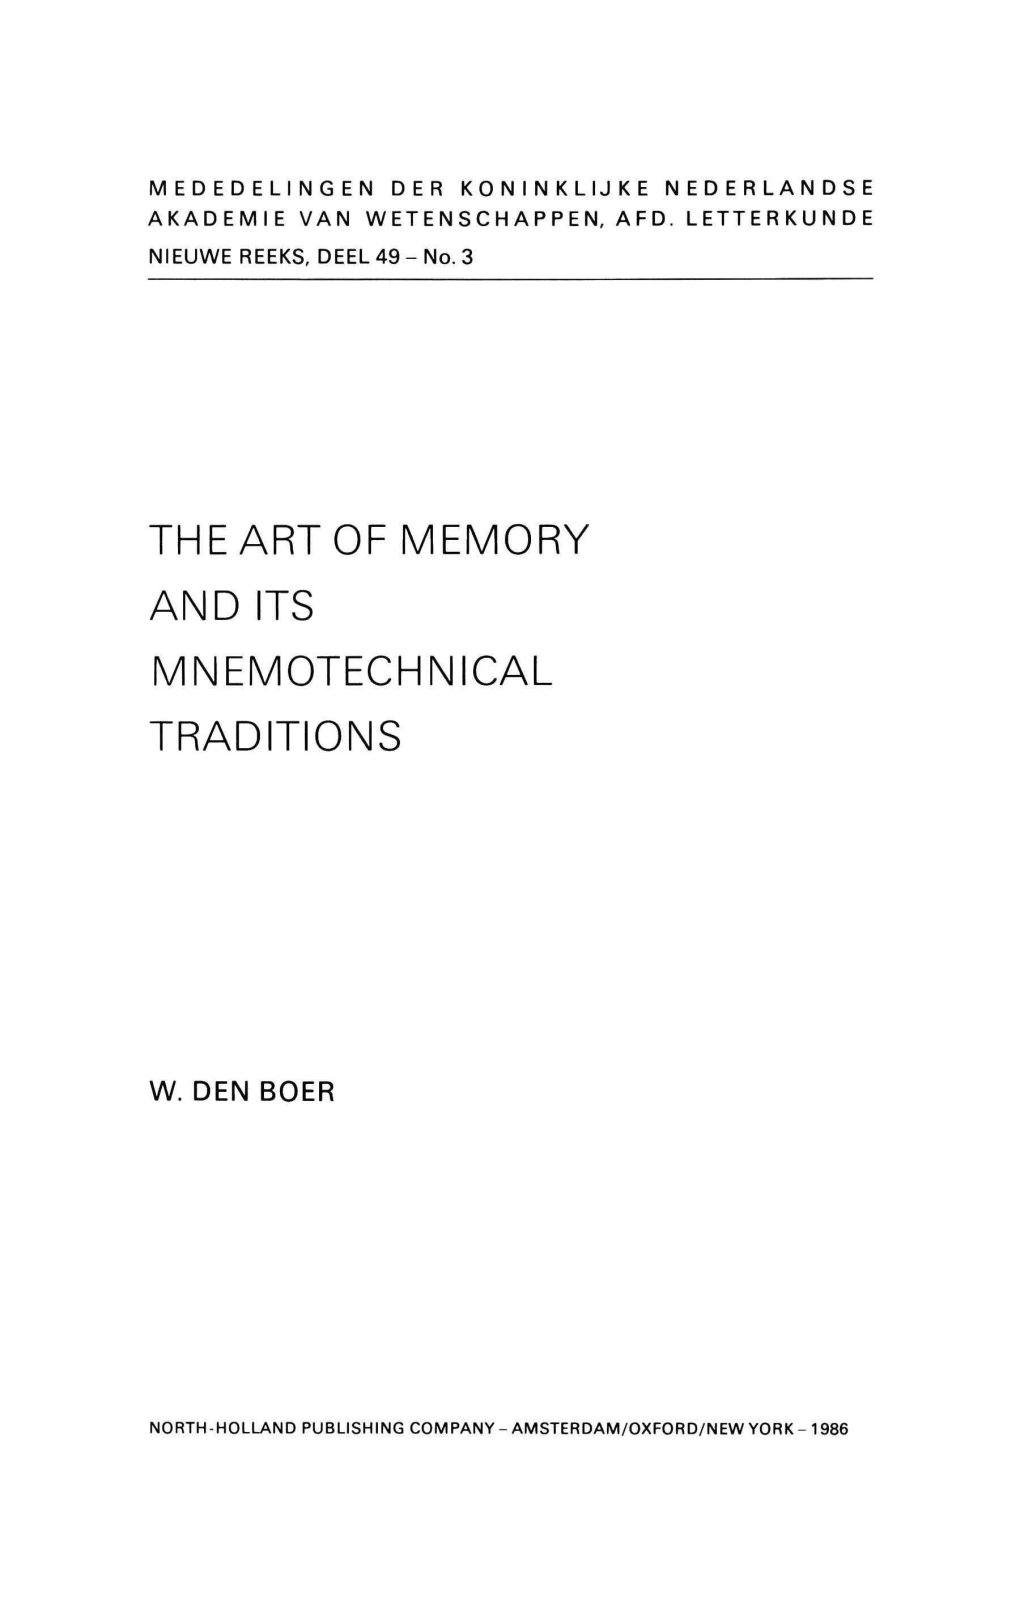 The Art of Memory and Its Mnemotechnical Traditions